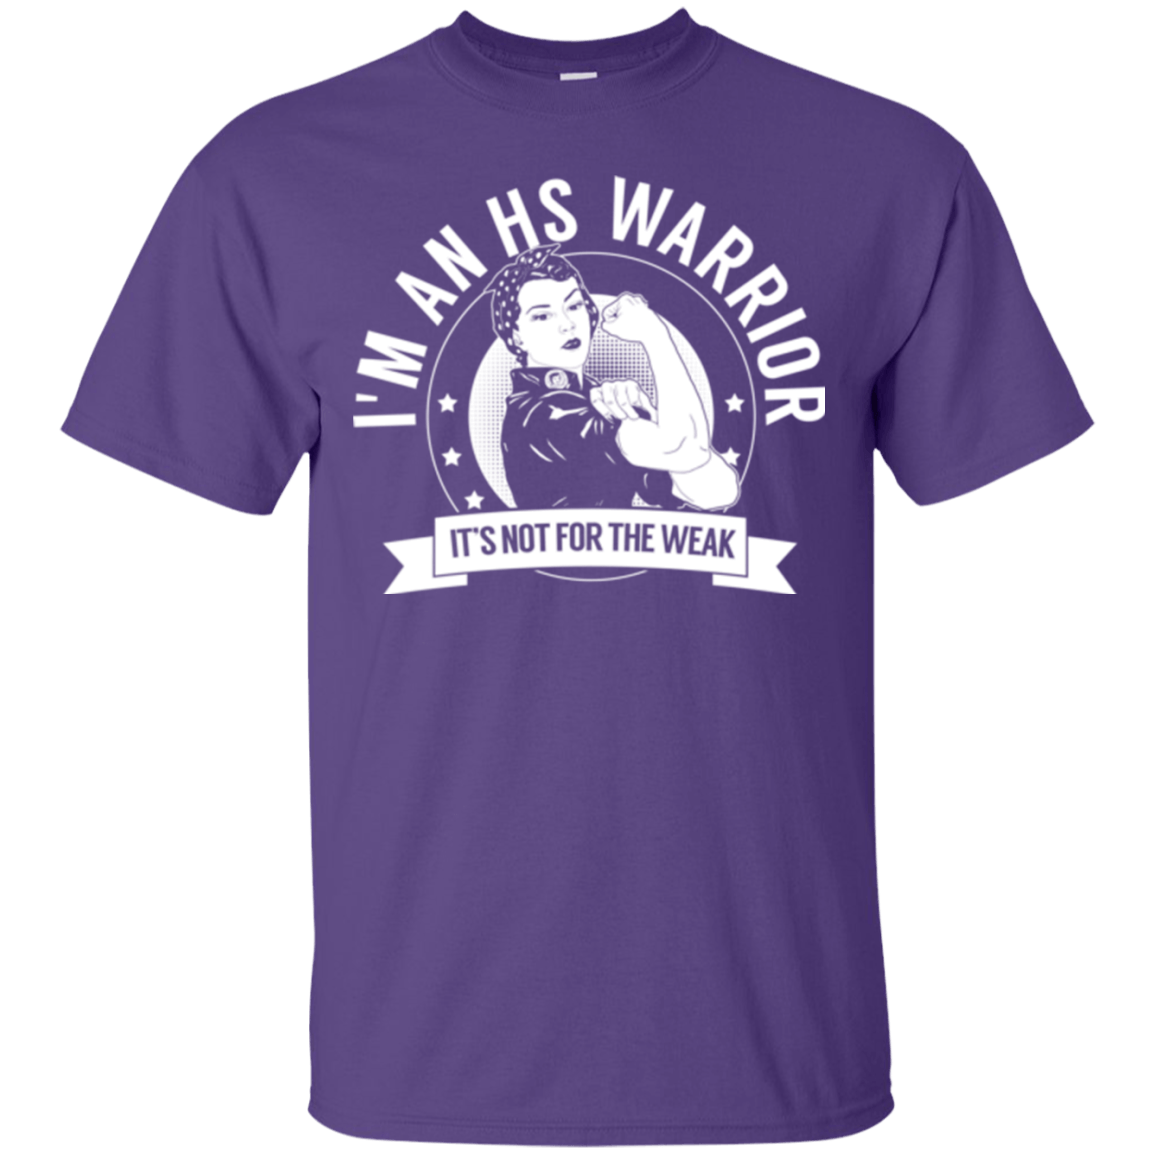 Hidradenitis Suppurativa - HS Warrior Not For The Weak Cotton T-Shirt - The Unchargeables